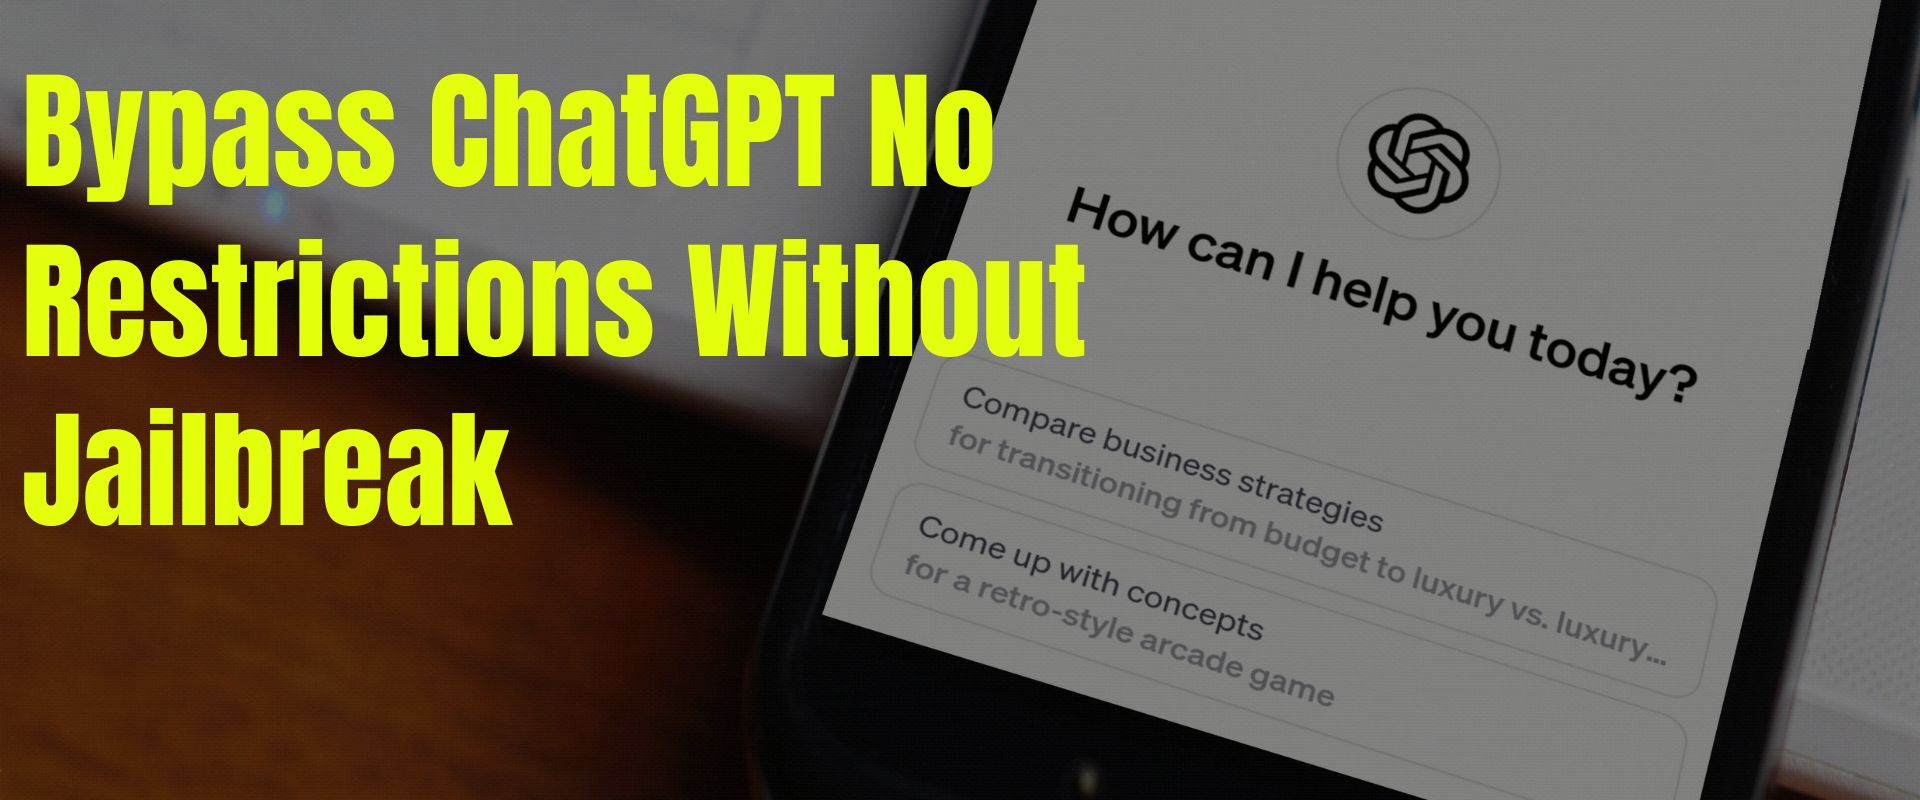 Bypass ChatGPT No Restrictions Without Jailbreak (Best Guide)